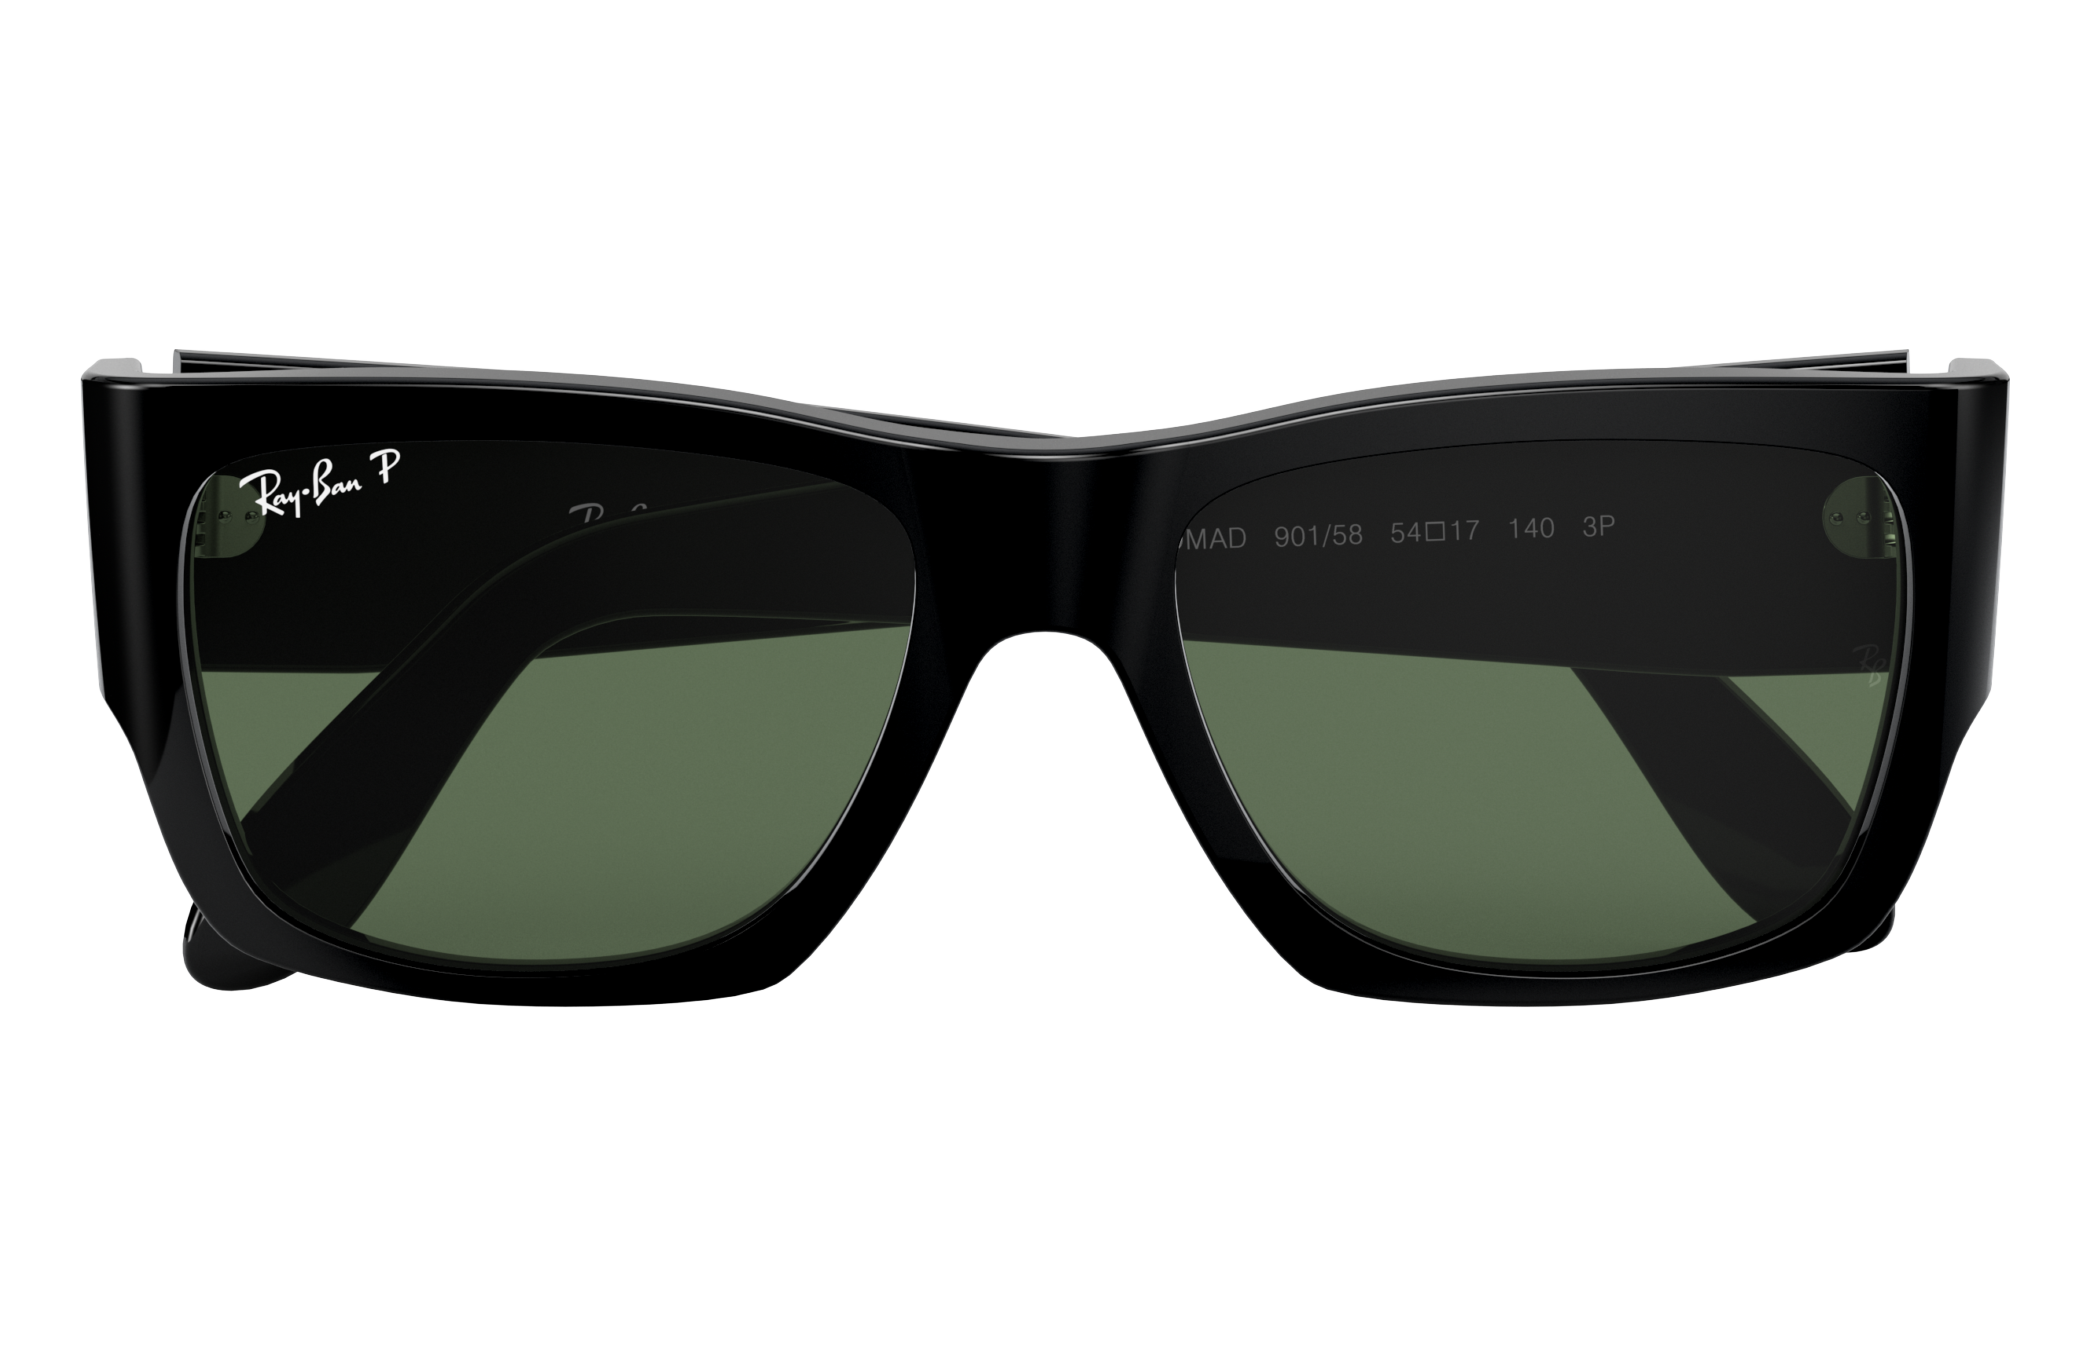 ray ban 3p meaning